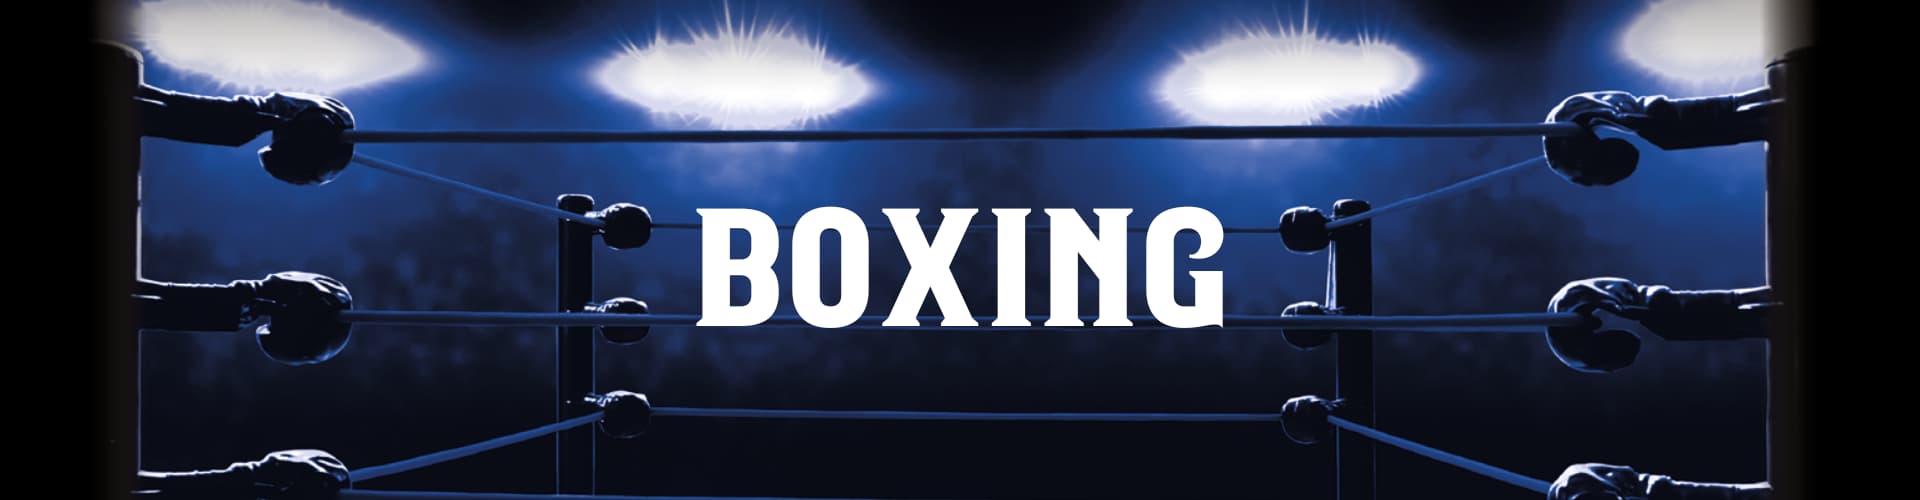 Watch Live Boxing in Poulton-le-fylde at Bull Hotel Pub